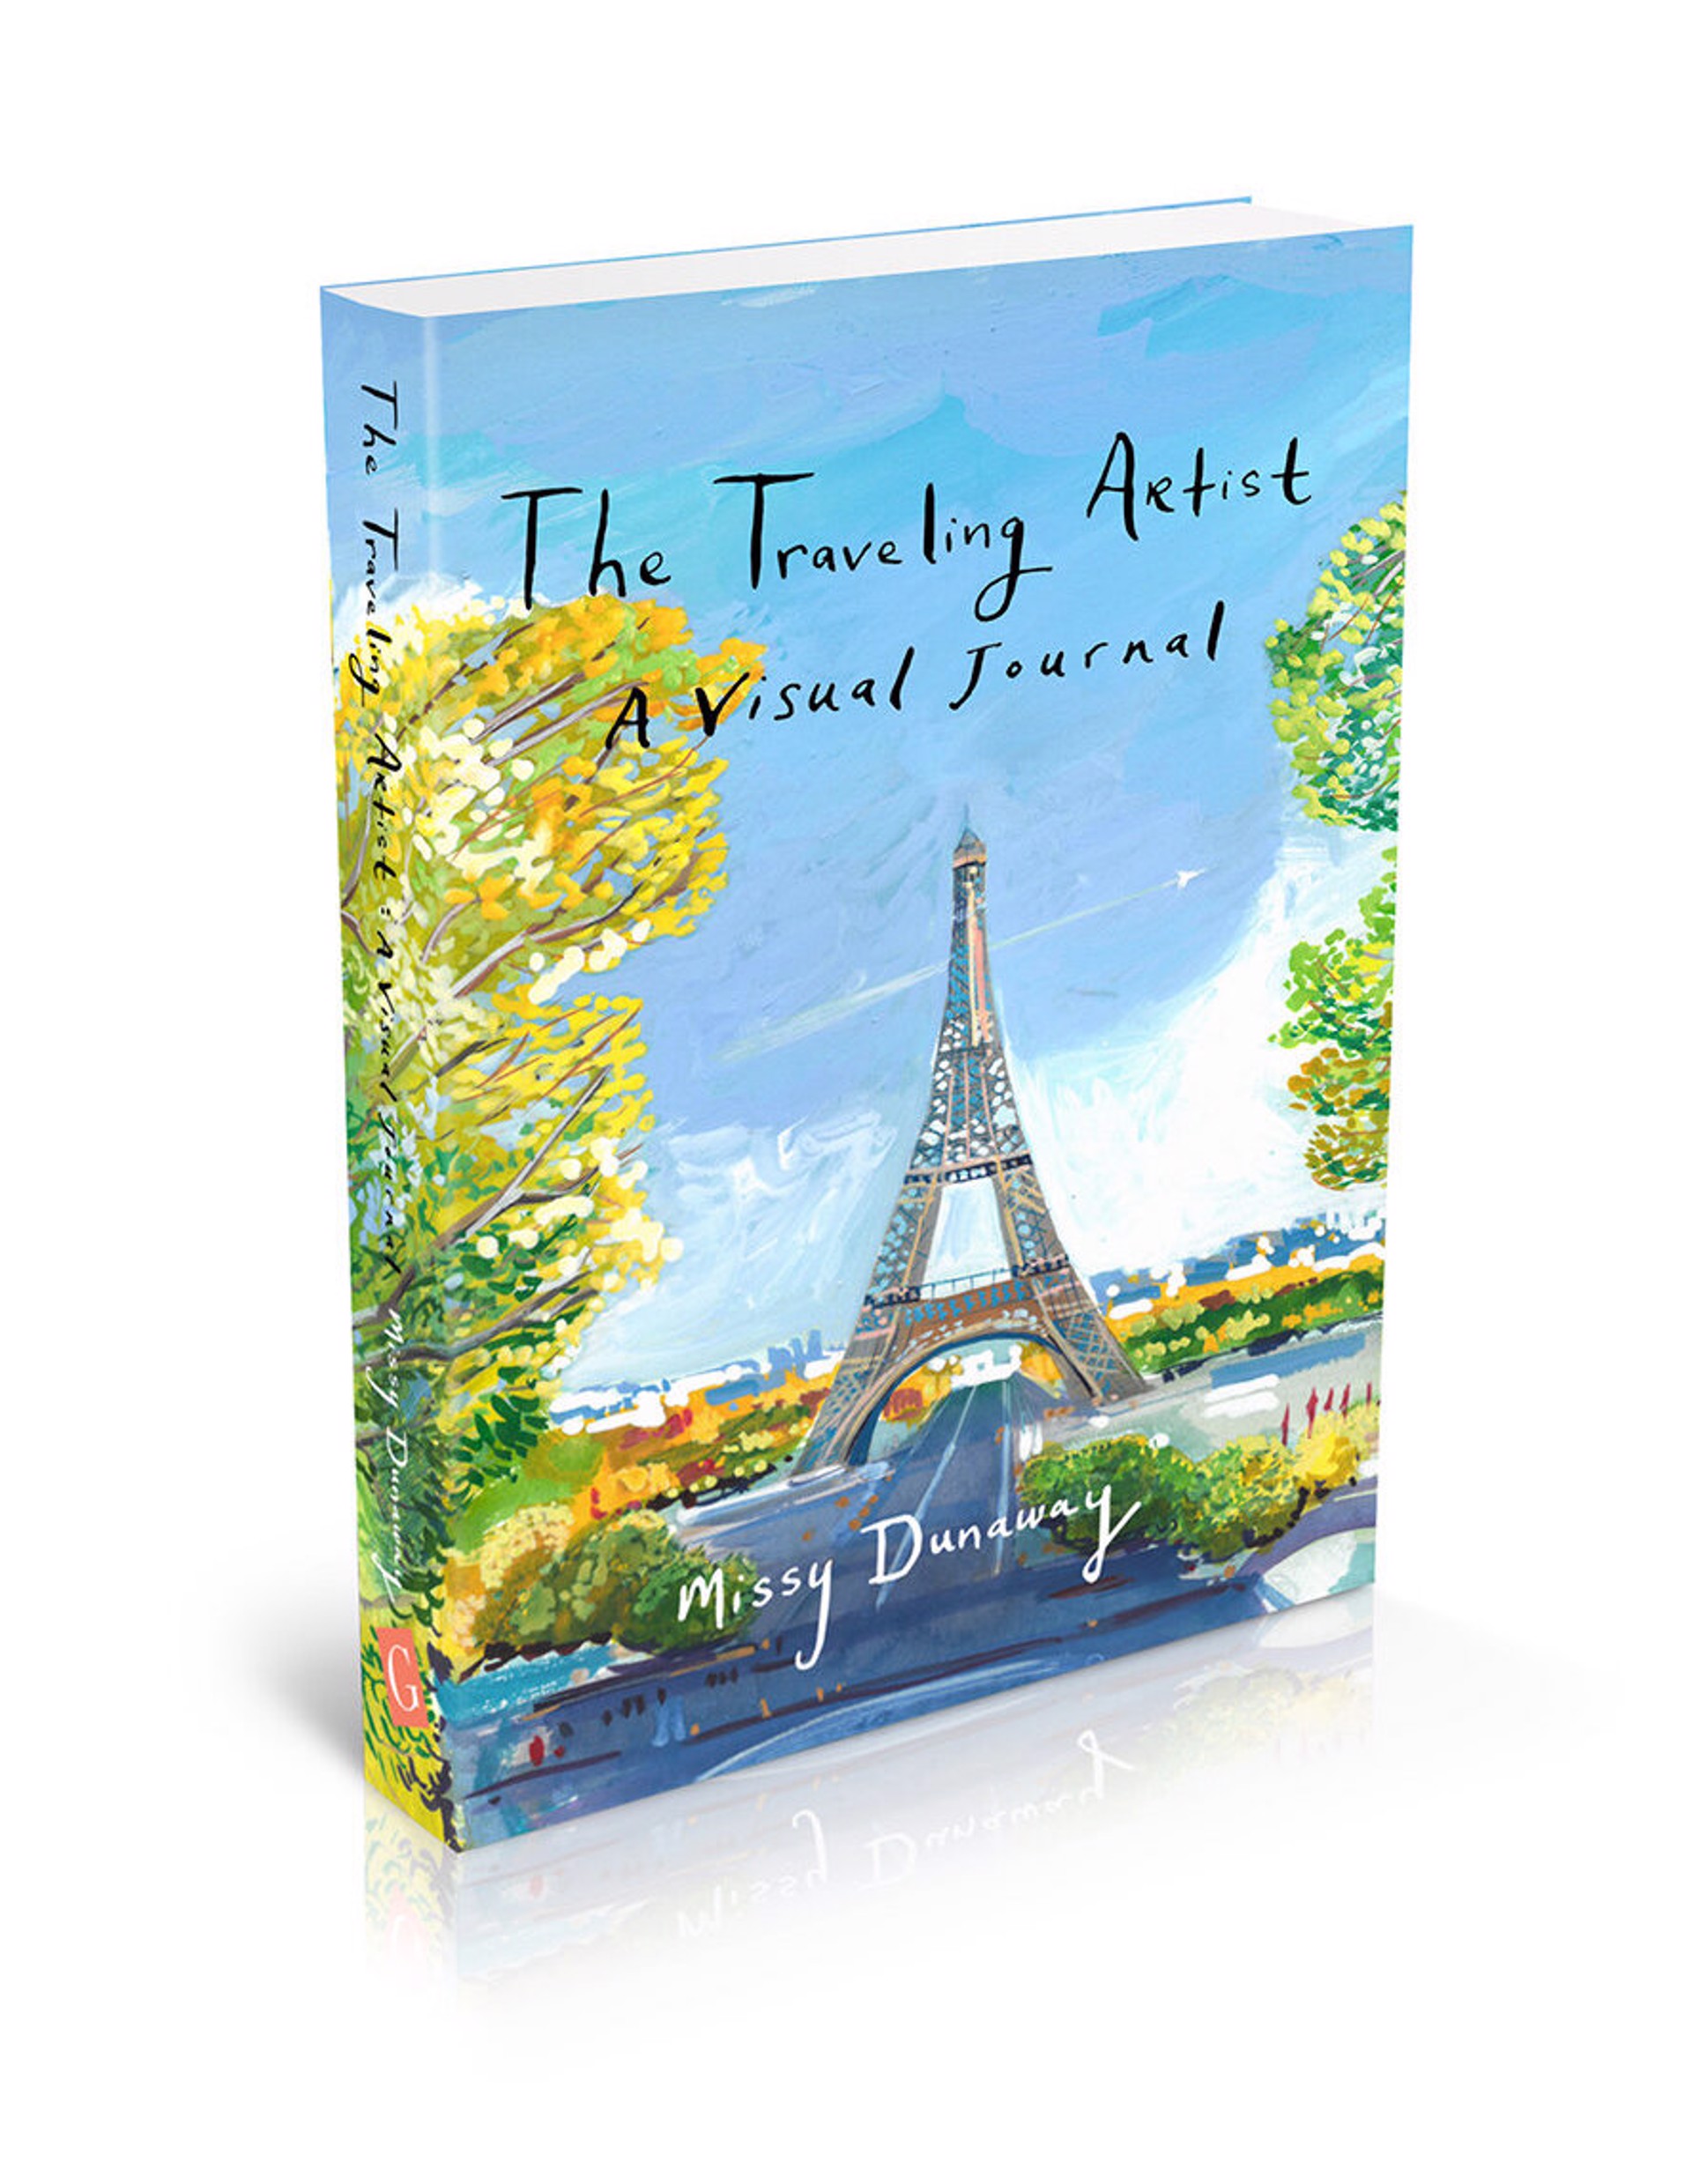 The Traveling Artist: A Visual Journal by Missy Dunaway